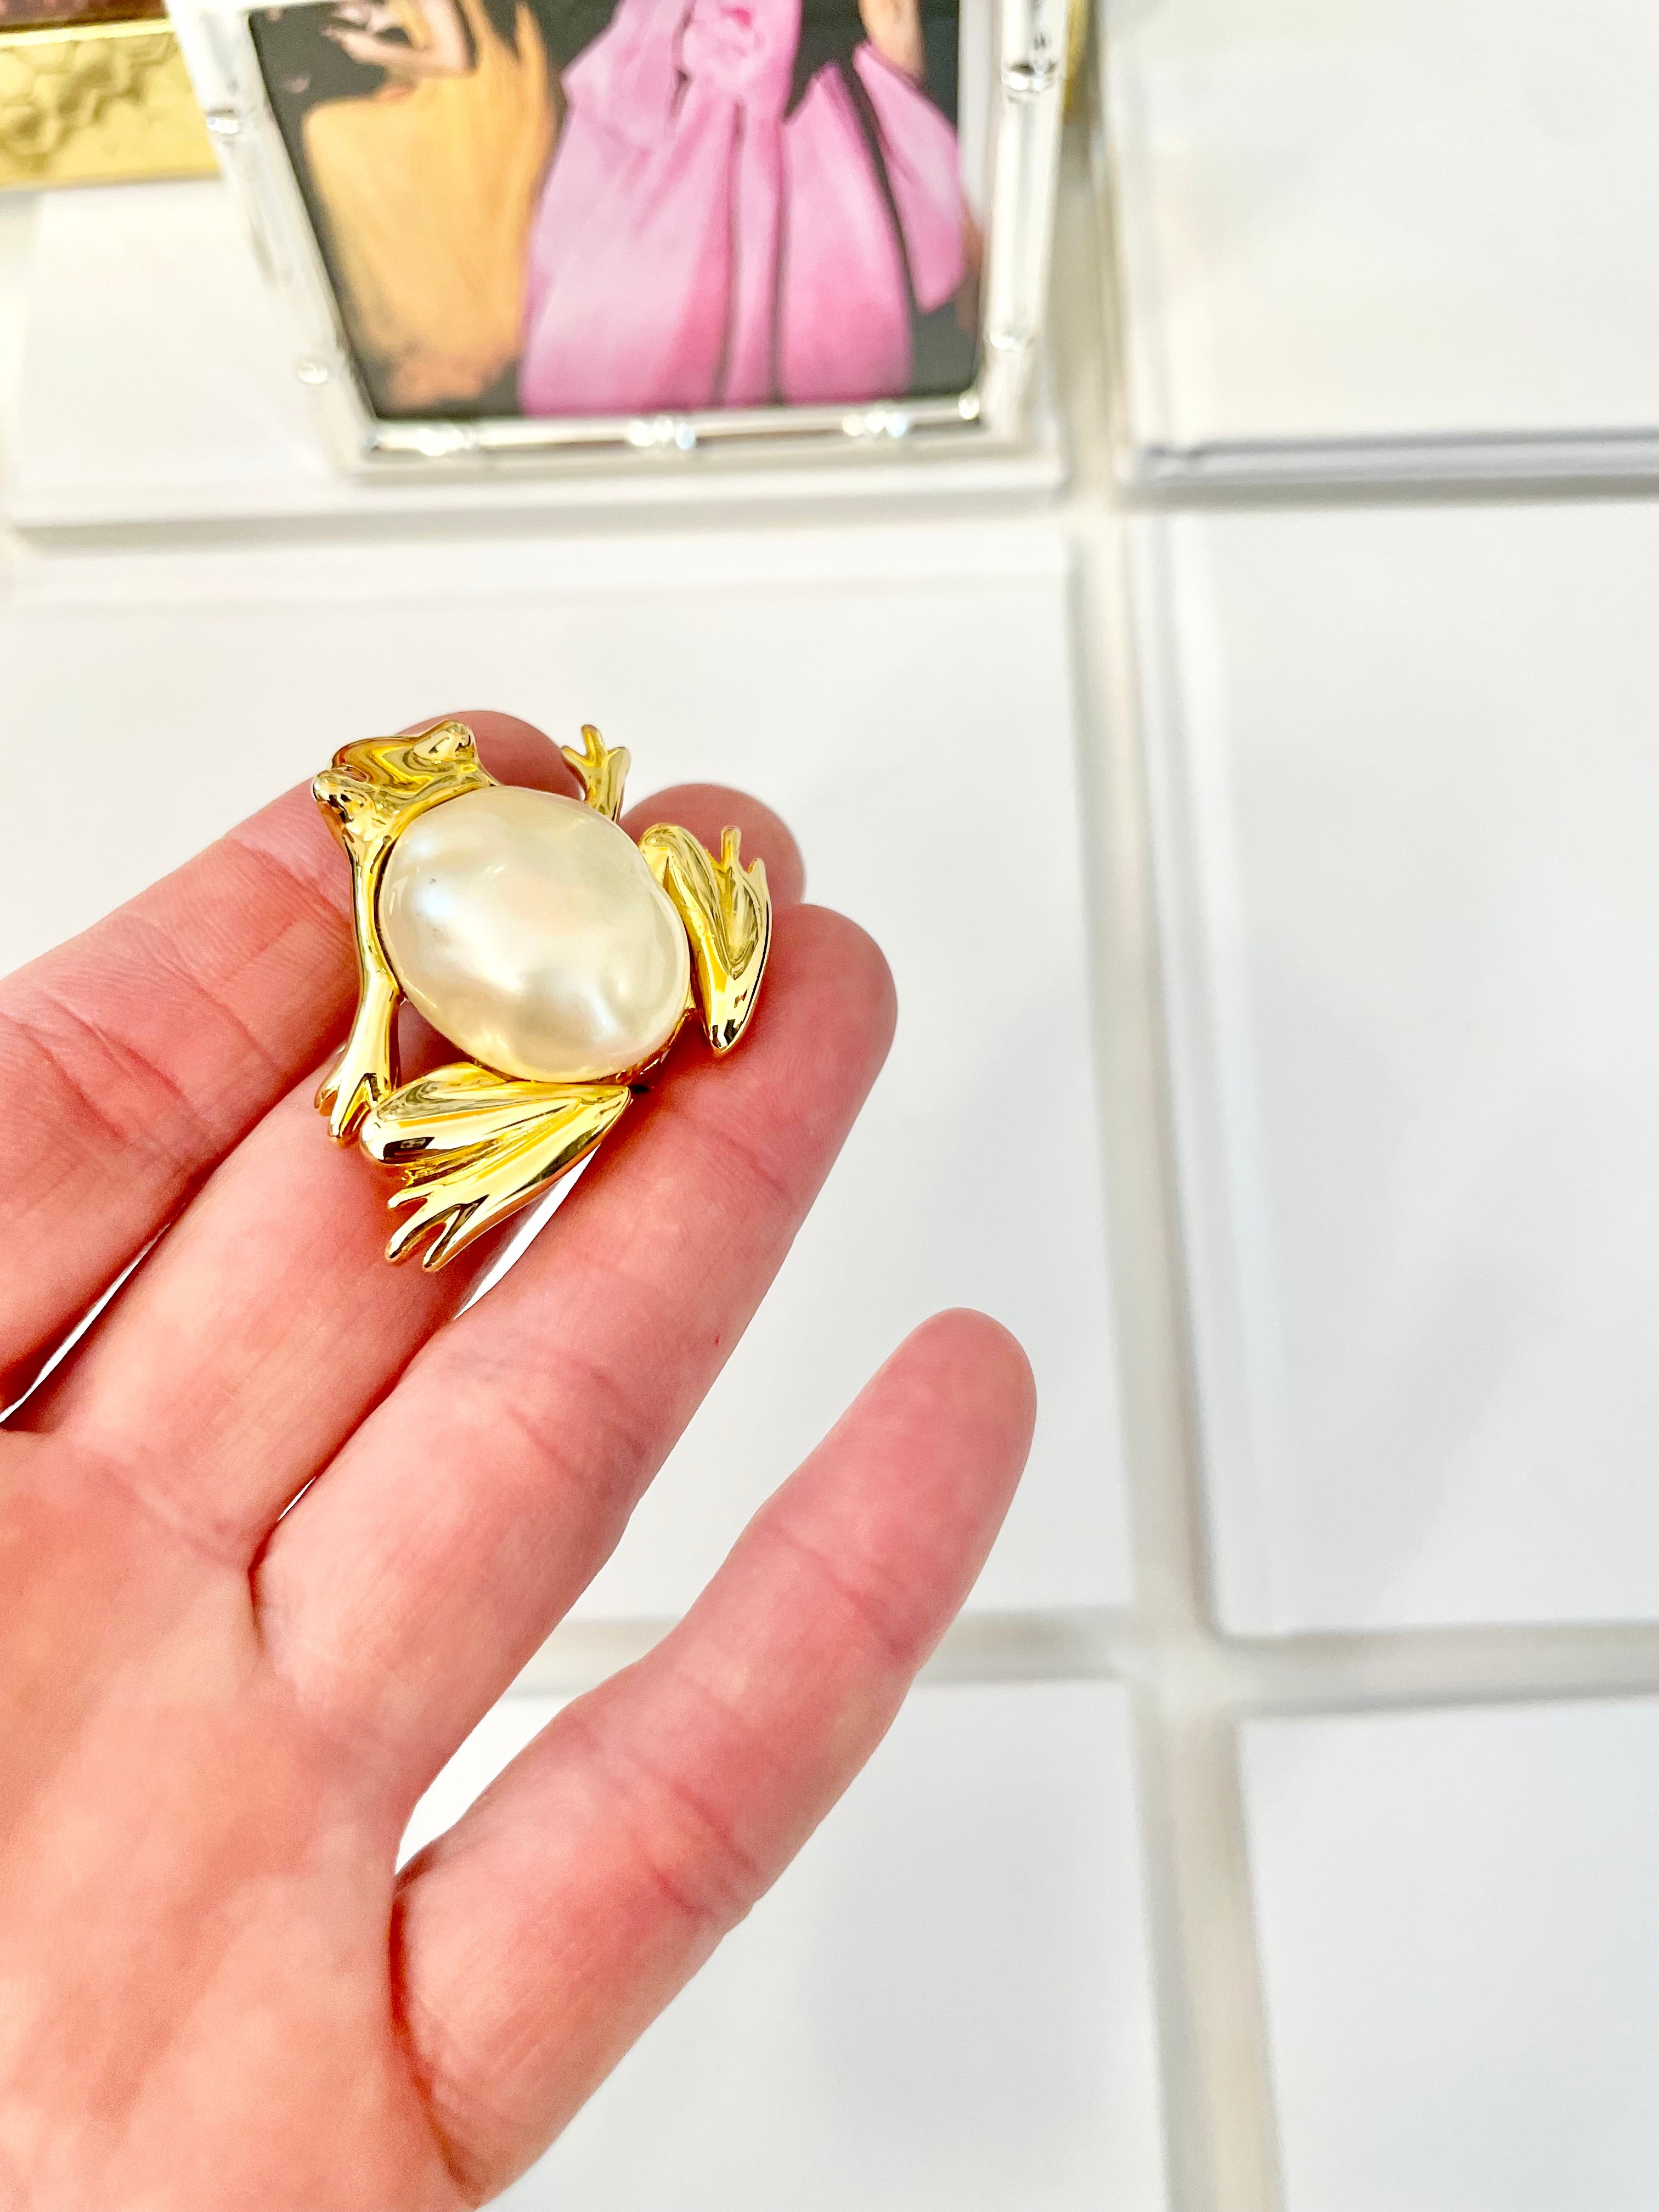 The charming lady loves anything with pearls. This Kenneth Jay lane figural gold brooch is truly divine!